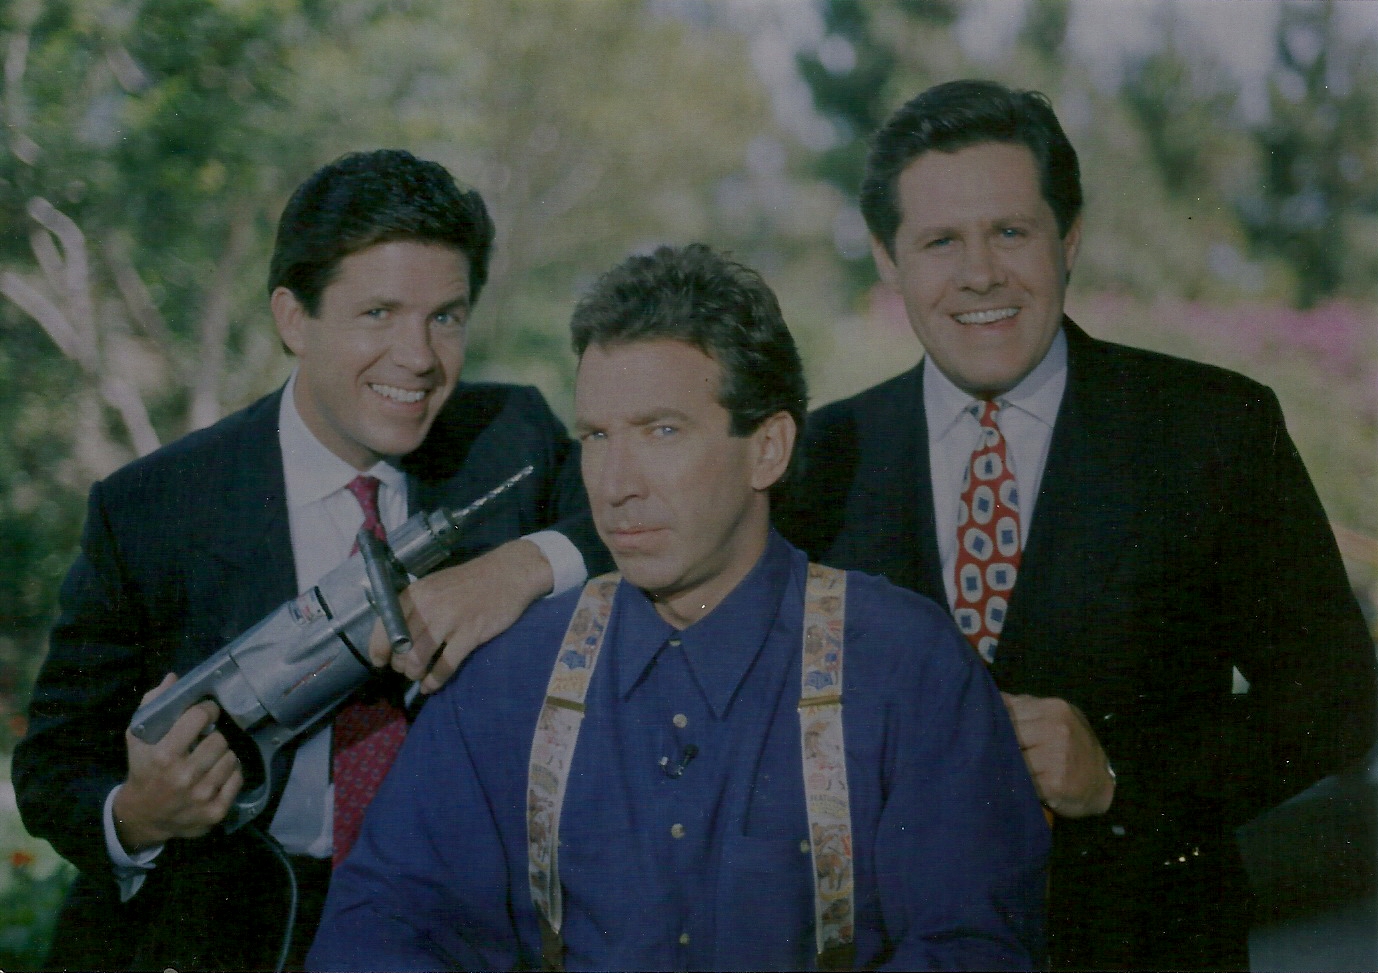 The McCain Brothers with Tim Allen.